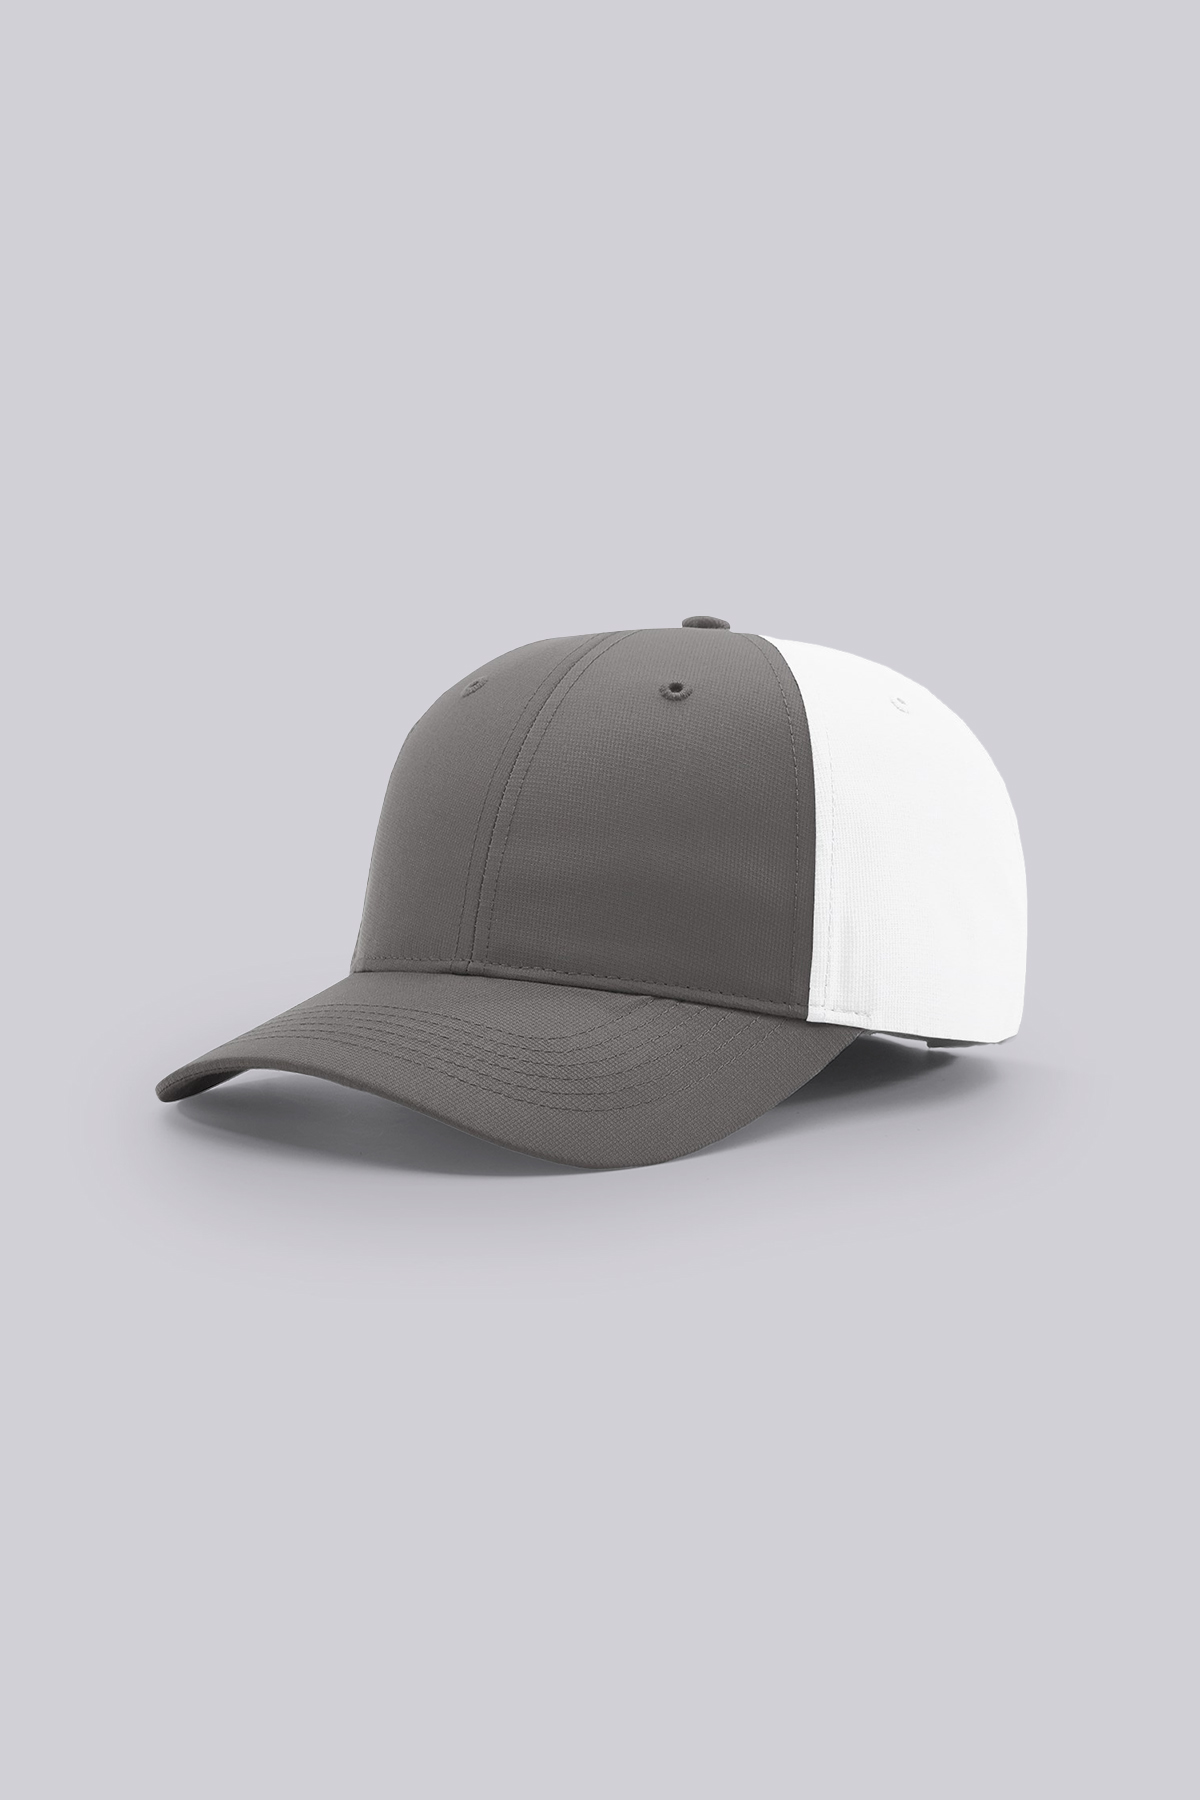 richardson-casual-lite-structured-caps-charcoal-white-liquid-yacht-wear